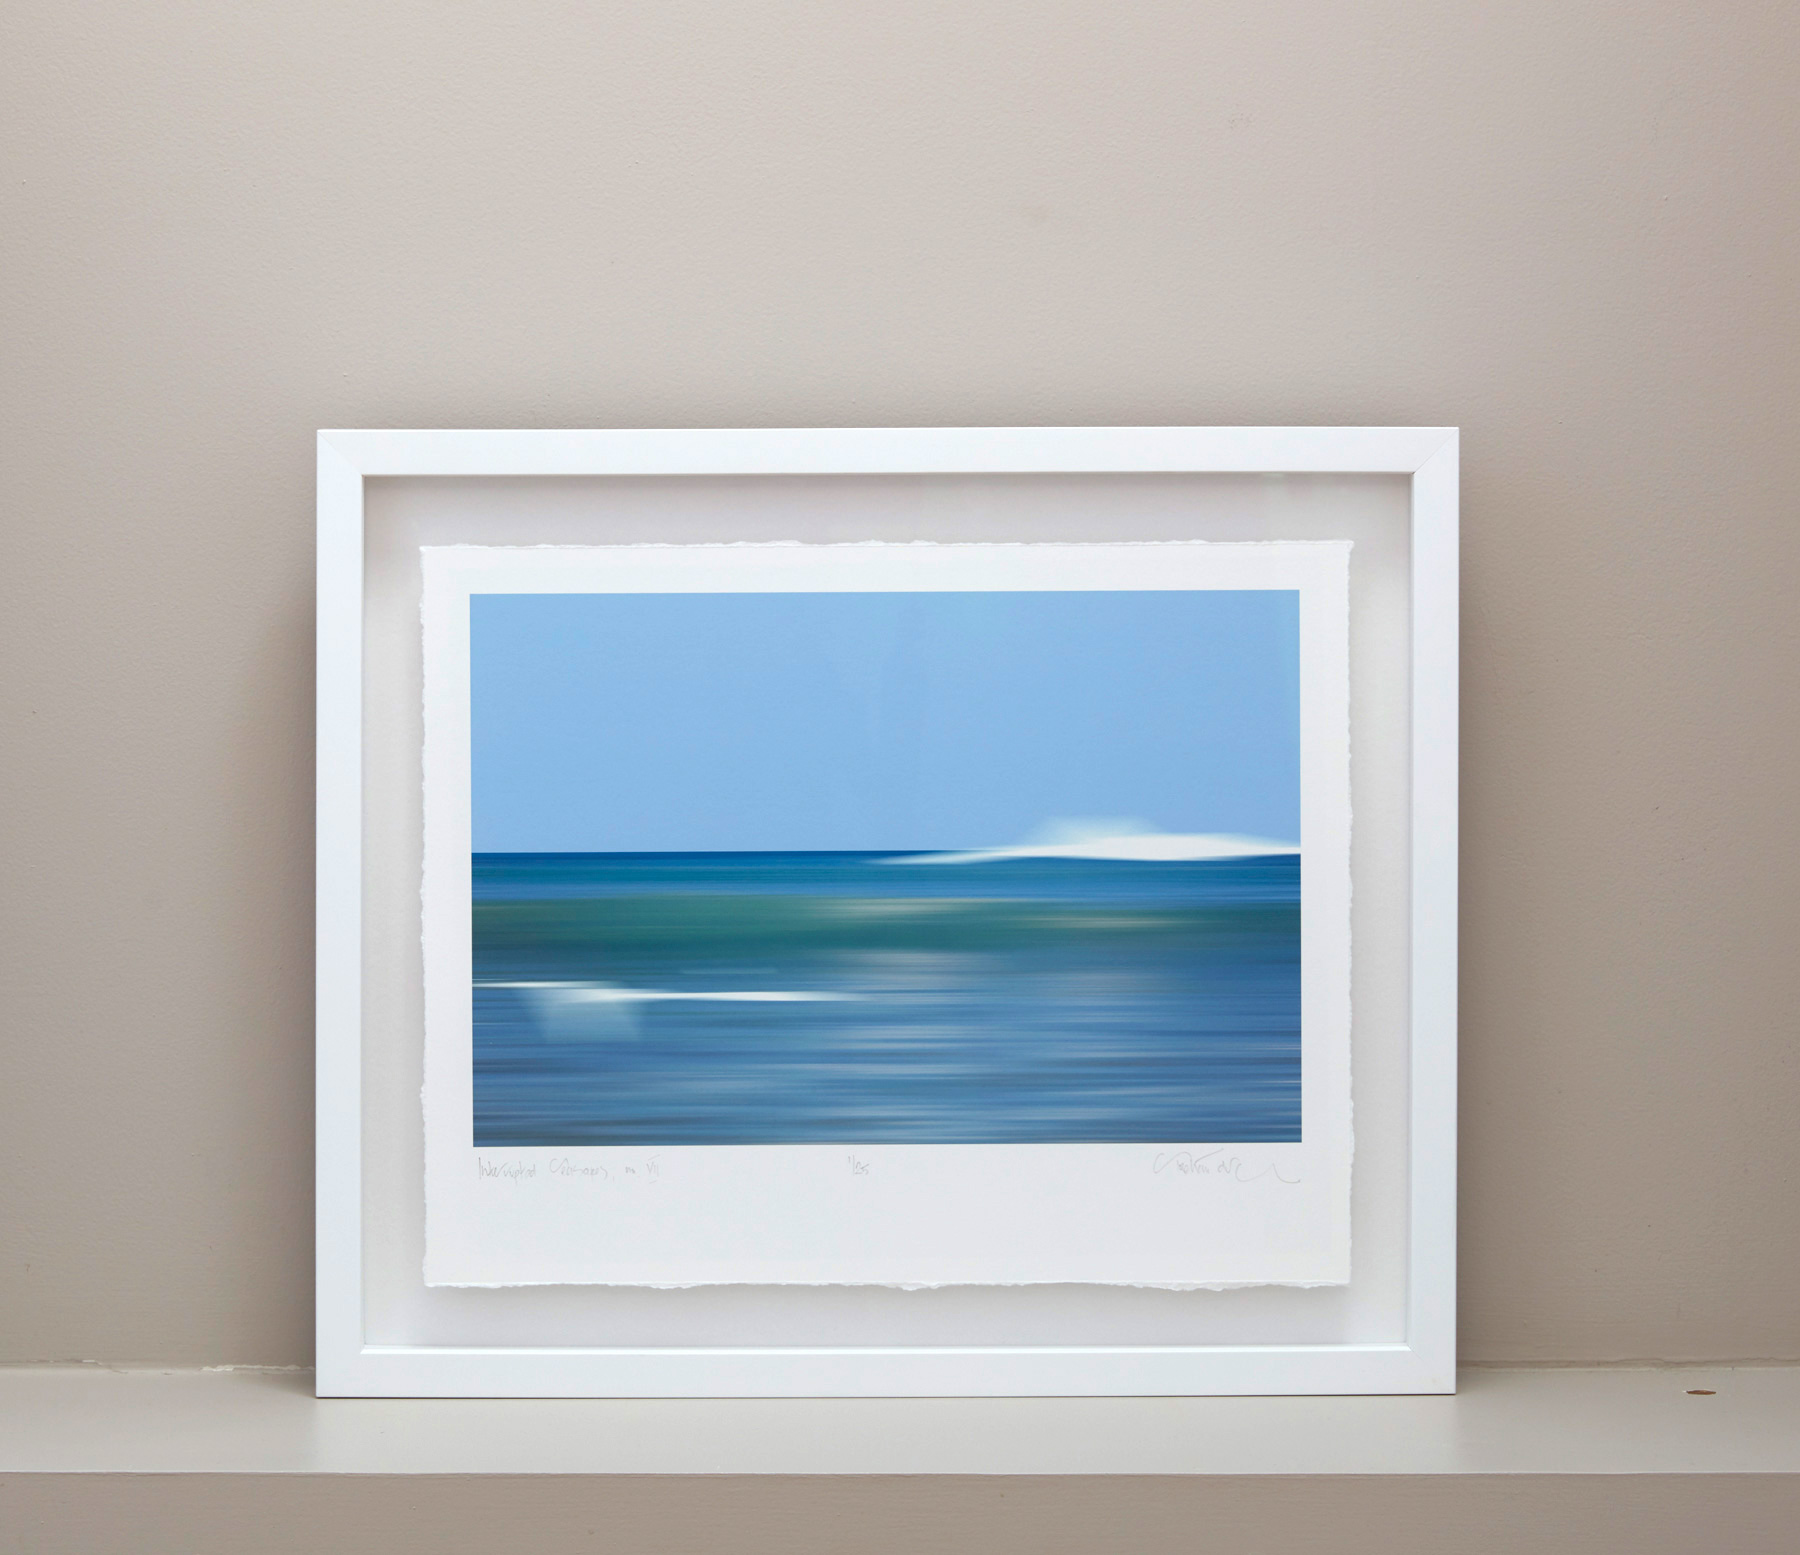 Interrupted Seascape, floating deckled edge print within a white box frame